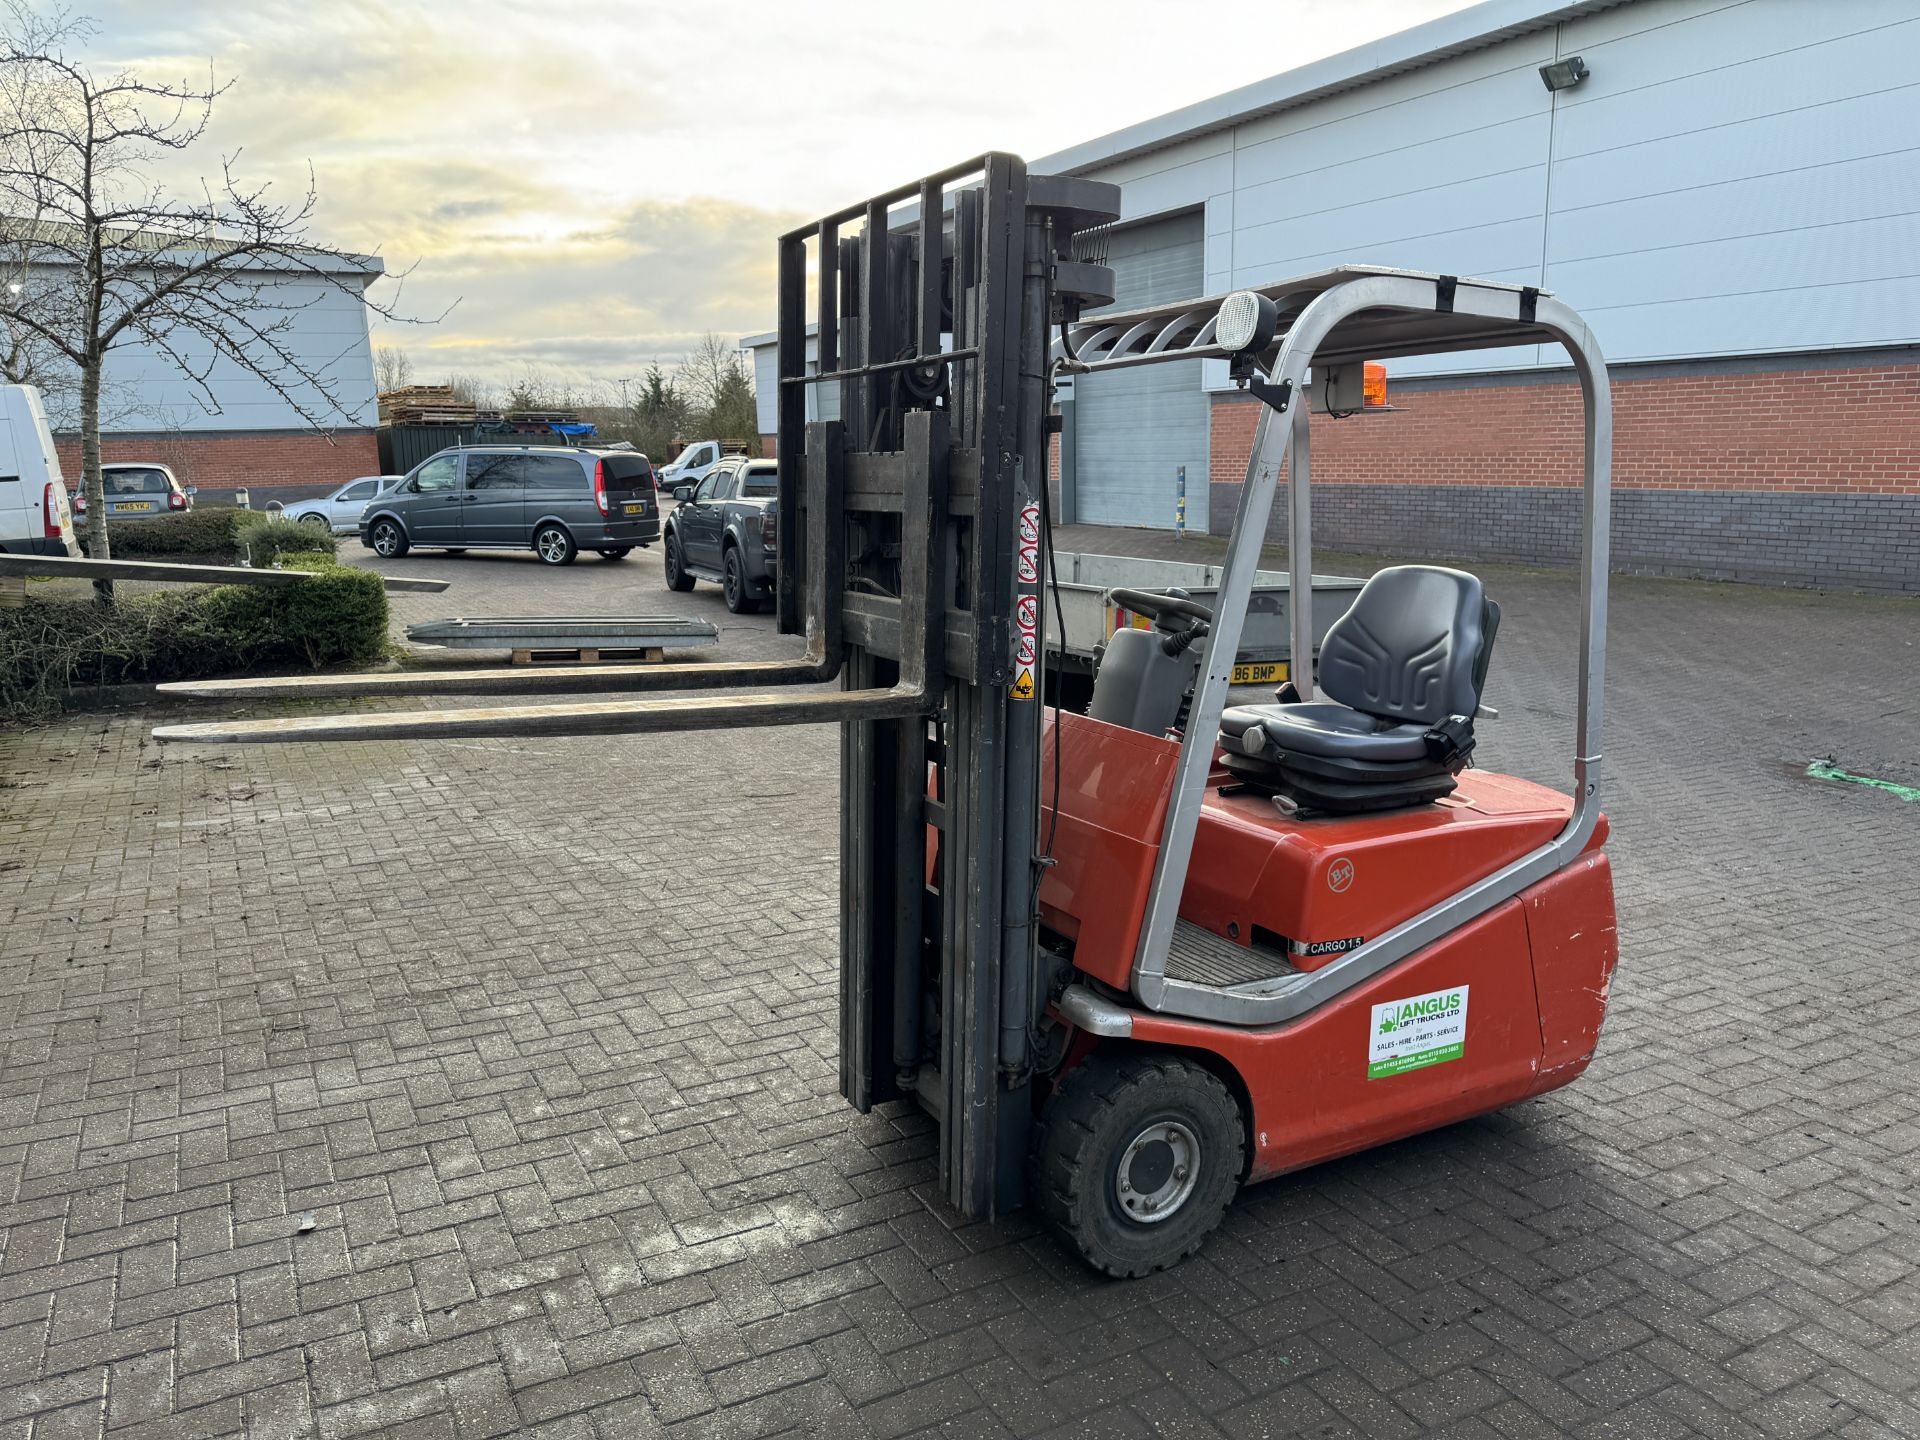 Cargo Model C 3 E 150 Tri Wheel Container Specification Electric Reach Truck - Image 9 of 28